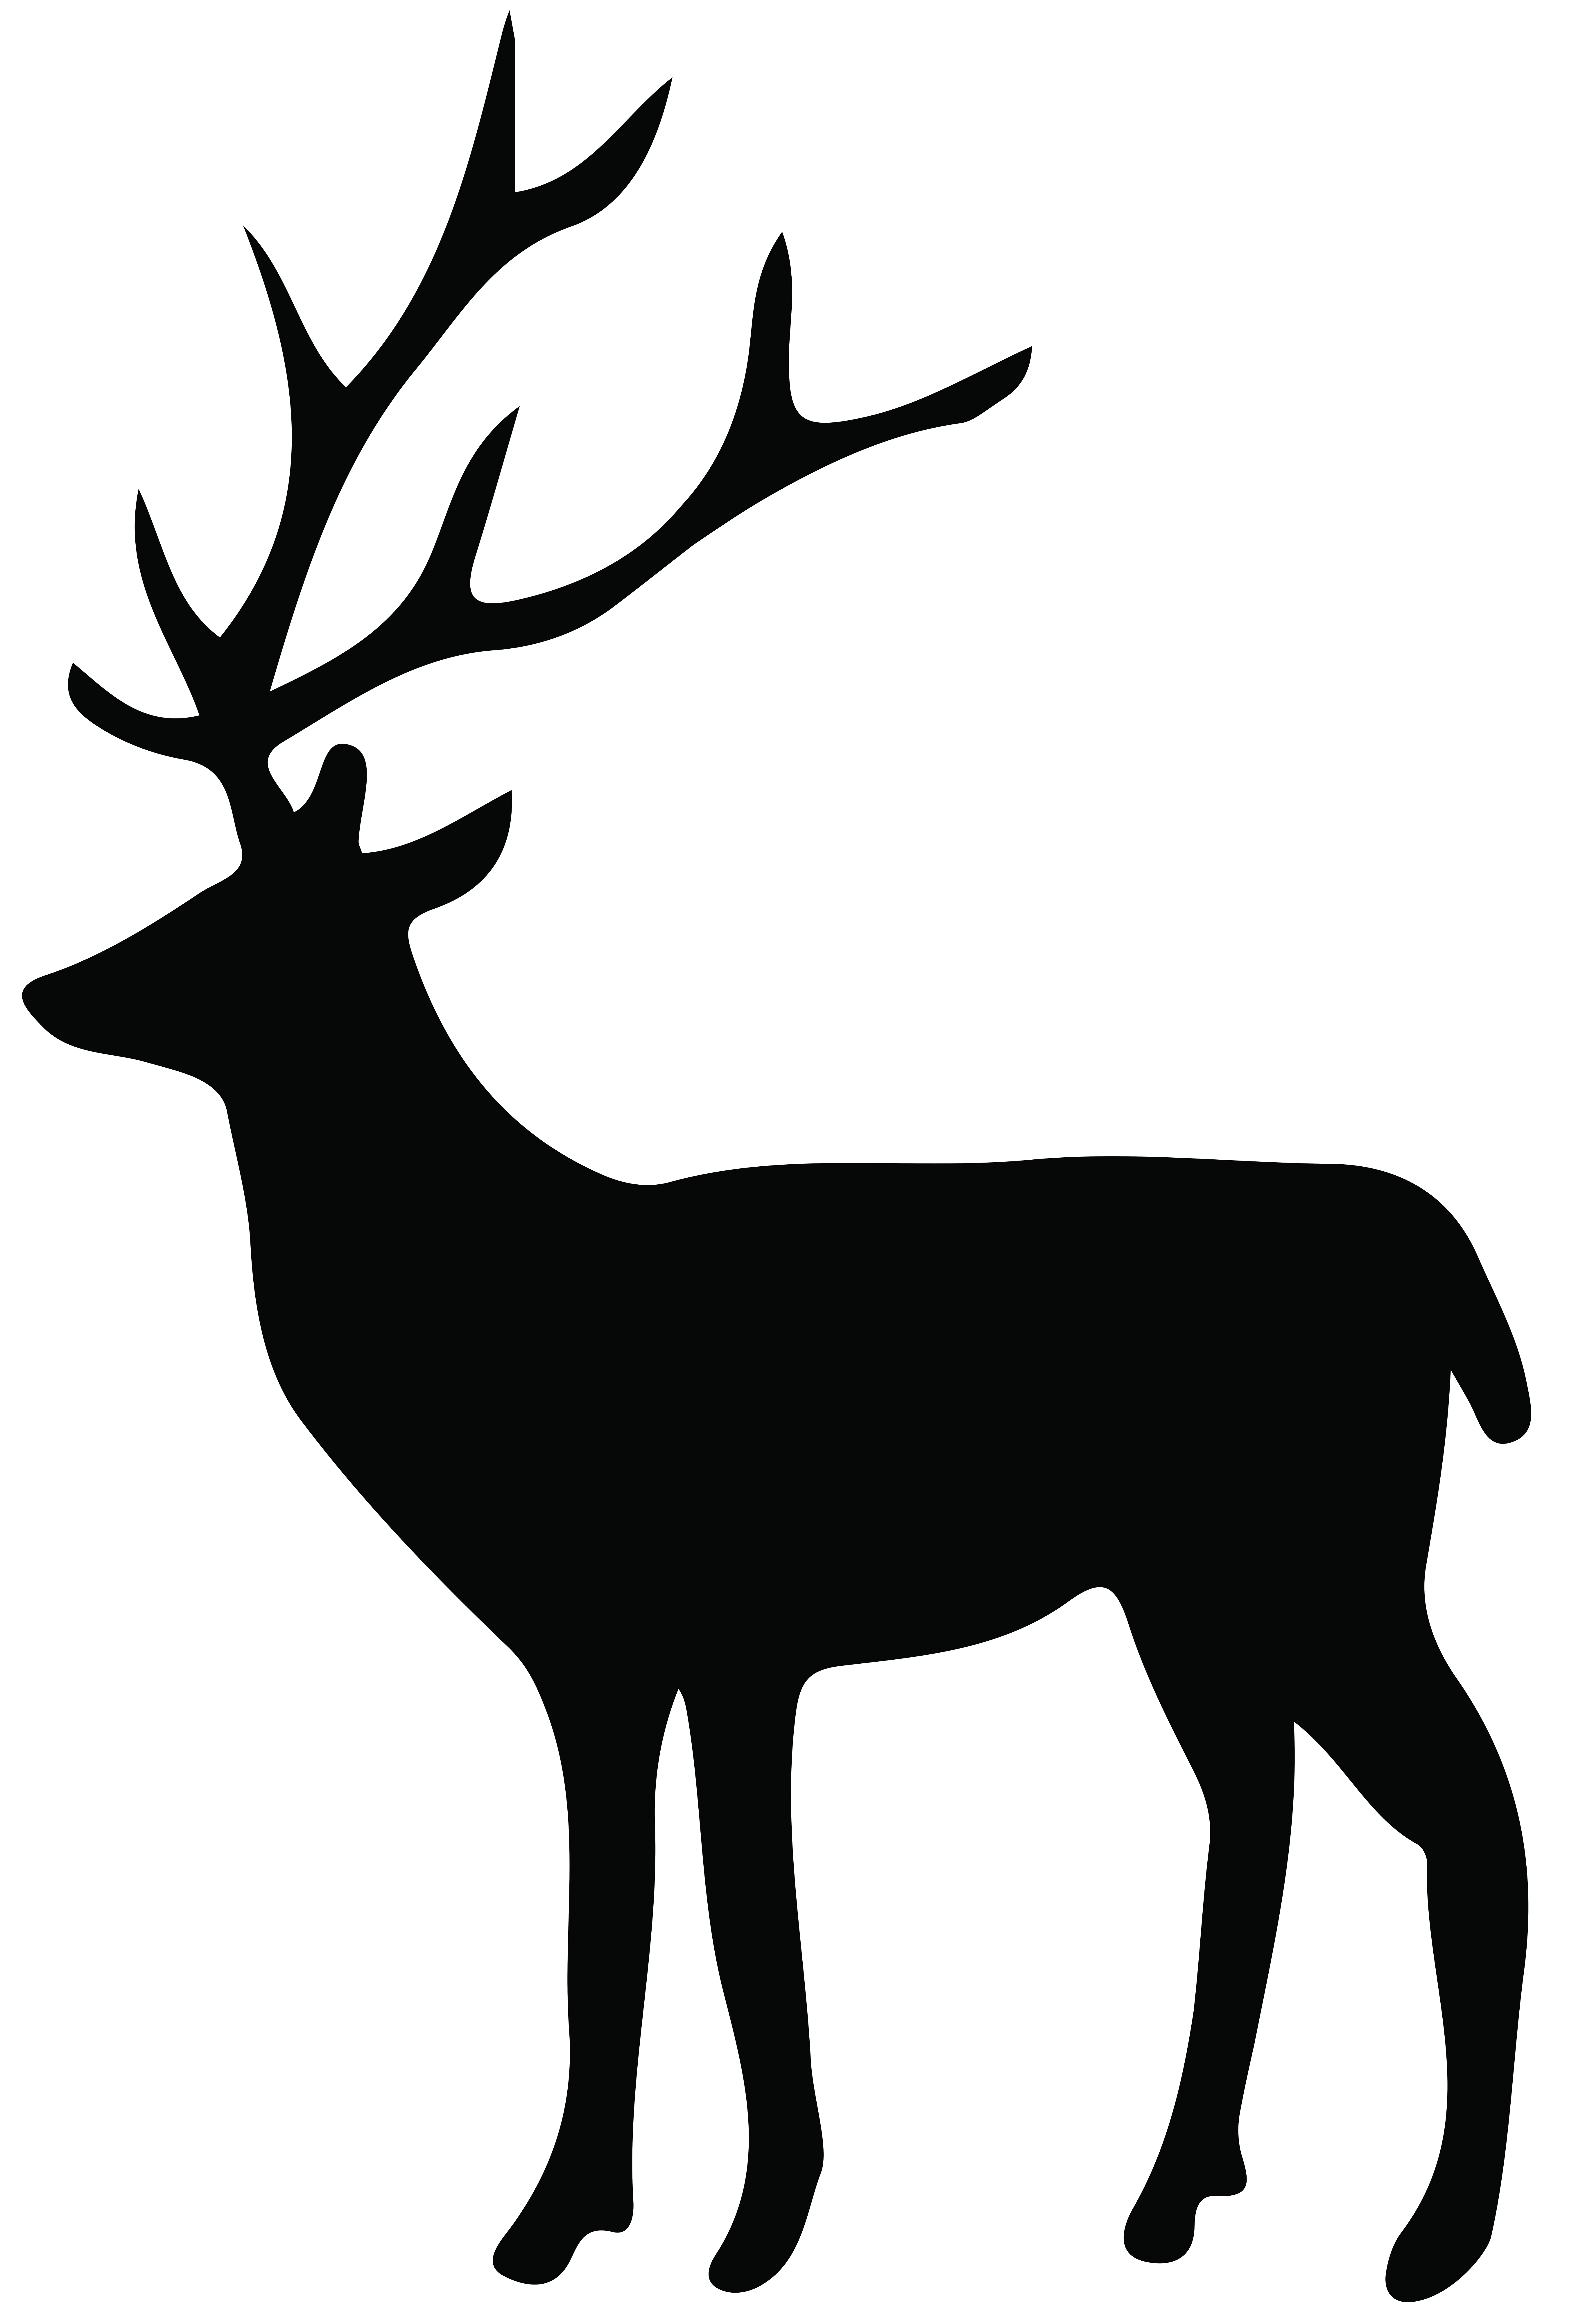 Deer Reindeer Silhouette White-Tailed Transparent PNG File HD Clipart